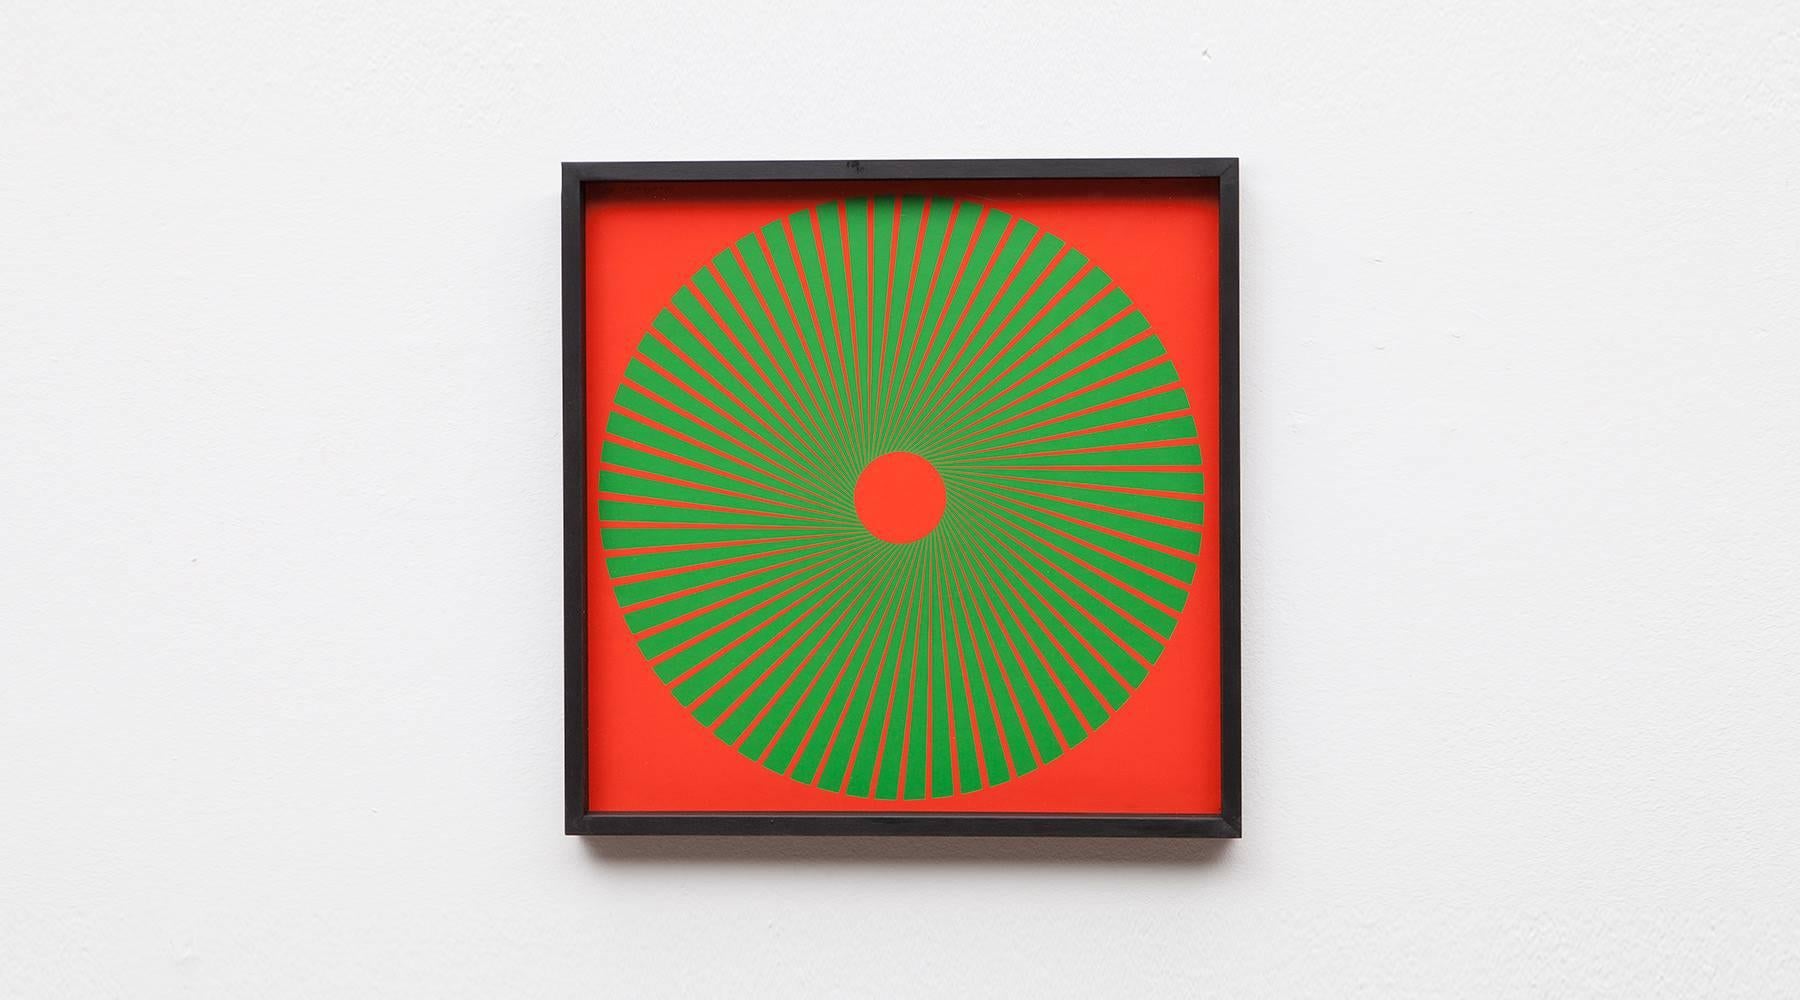 Screenprints on cardboard by German artist Wolfgang Ludwig. The work is from 1966, each signed in the front. Measurements including wooden high-quality shadow-box frame H 37, W 37 cm. 

Ludwig is regarded as one of the most important German artists